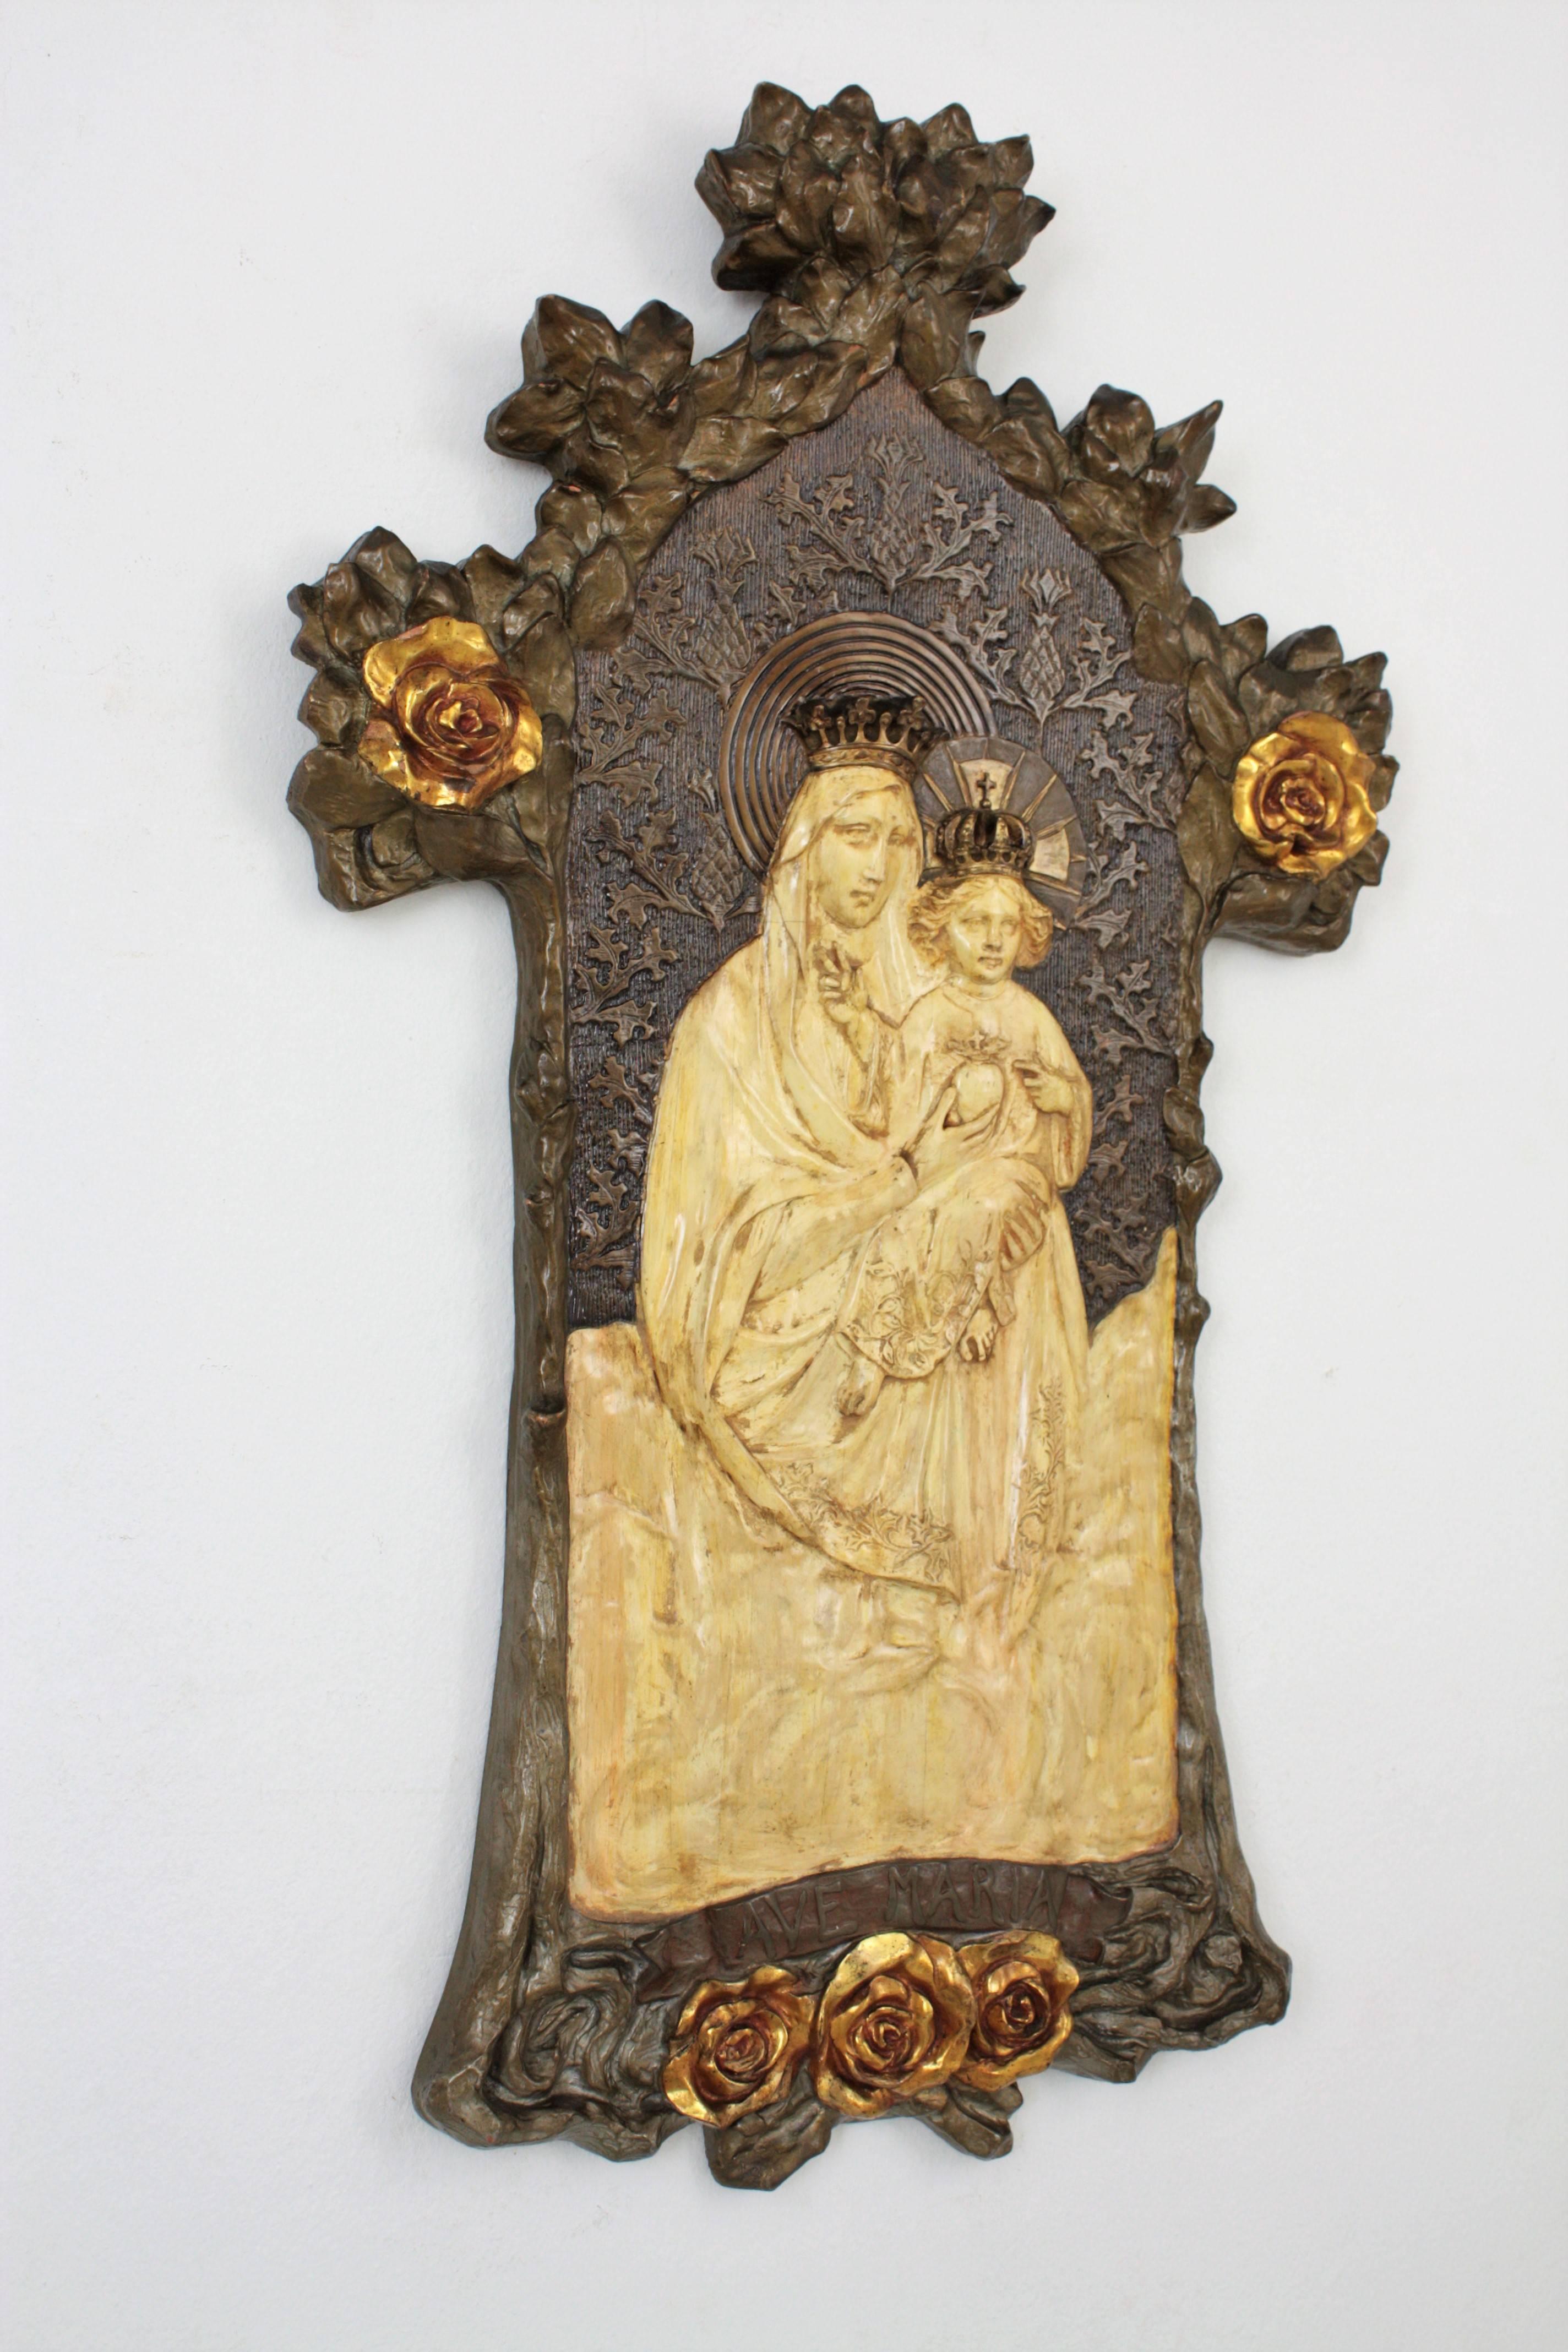 Interesting Antoni Gaudí style Art Nouveau bas relief depicting the virgin and child using molded stucco with polychrome technique and gold leaf accents. This piece has an exquisite molded work with naturalistic ornamentation and gold leaf